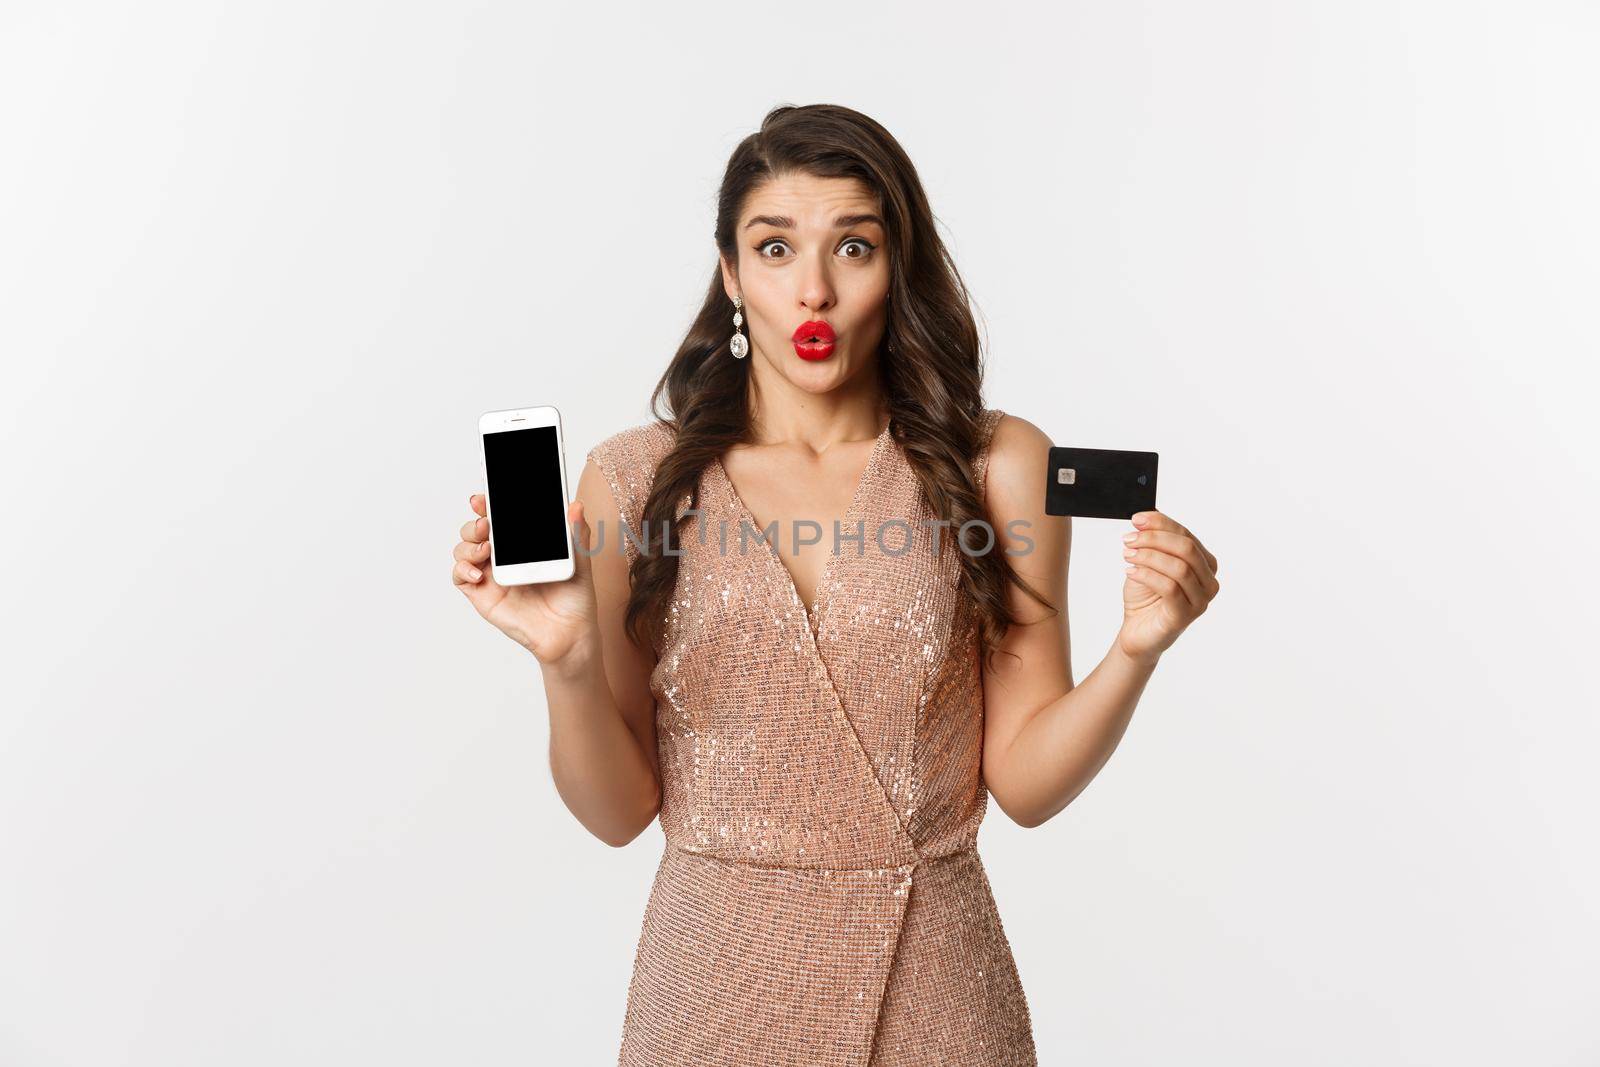 Online shopping and holidays concept. Excited beautiful lady in elegant dress showing mobile screen and credit card, standing over white background.